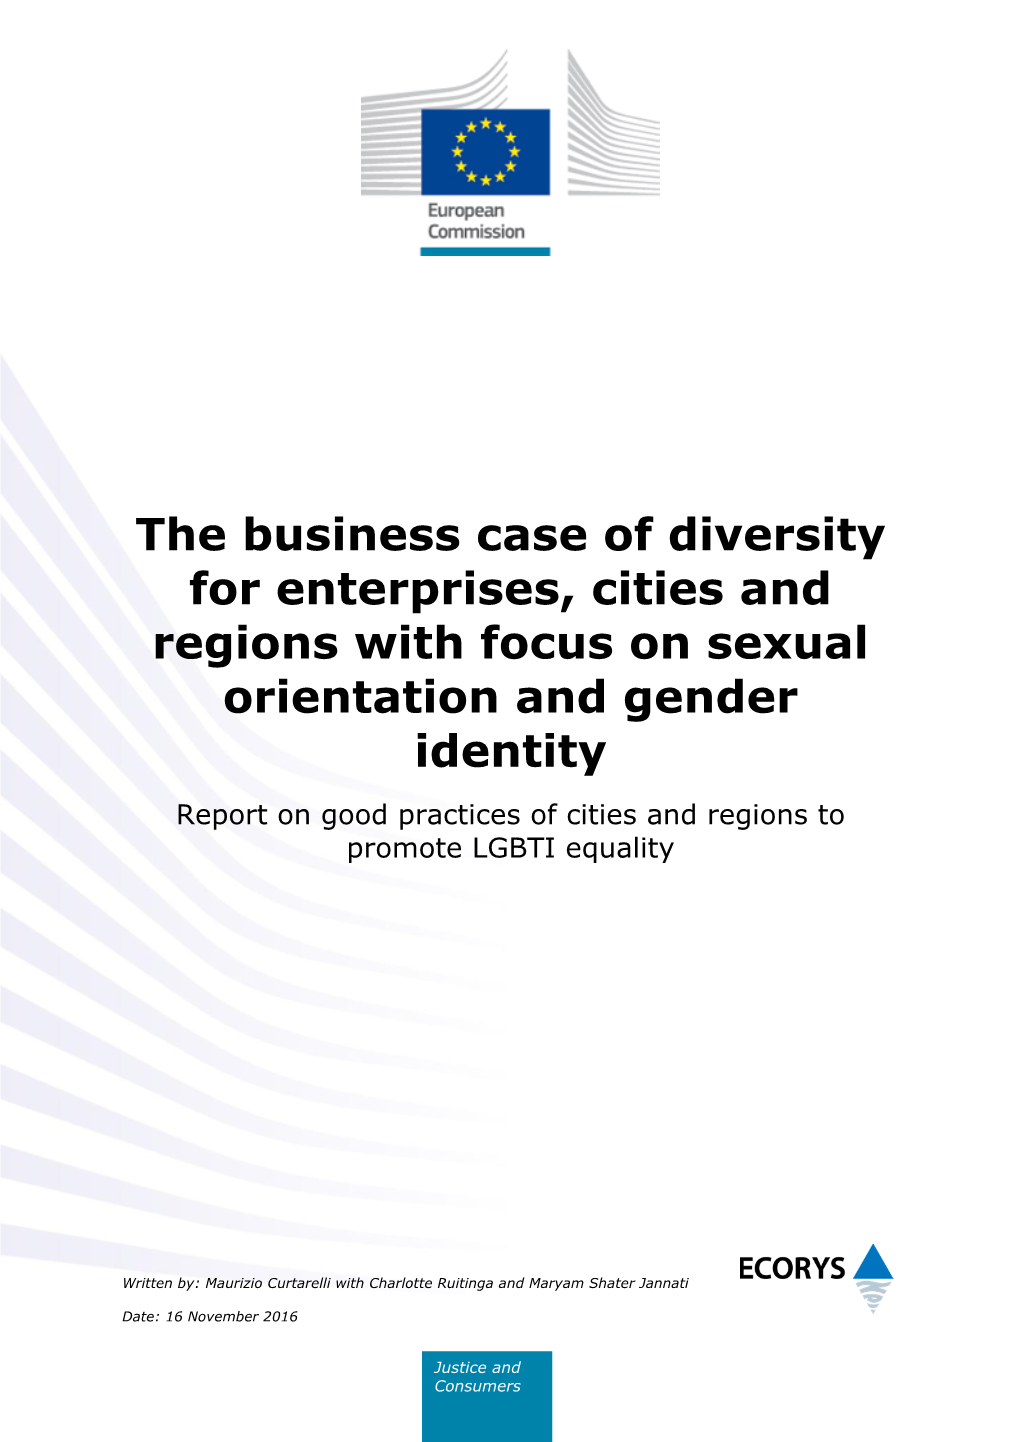 The Business Case of Diversity for Enterprises, Cities and Regions With